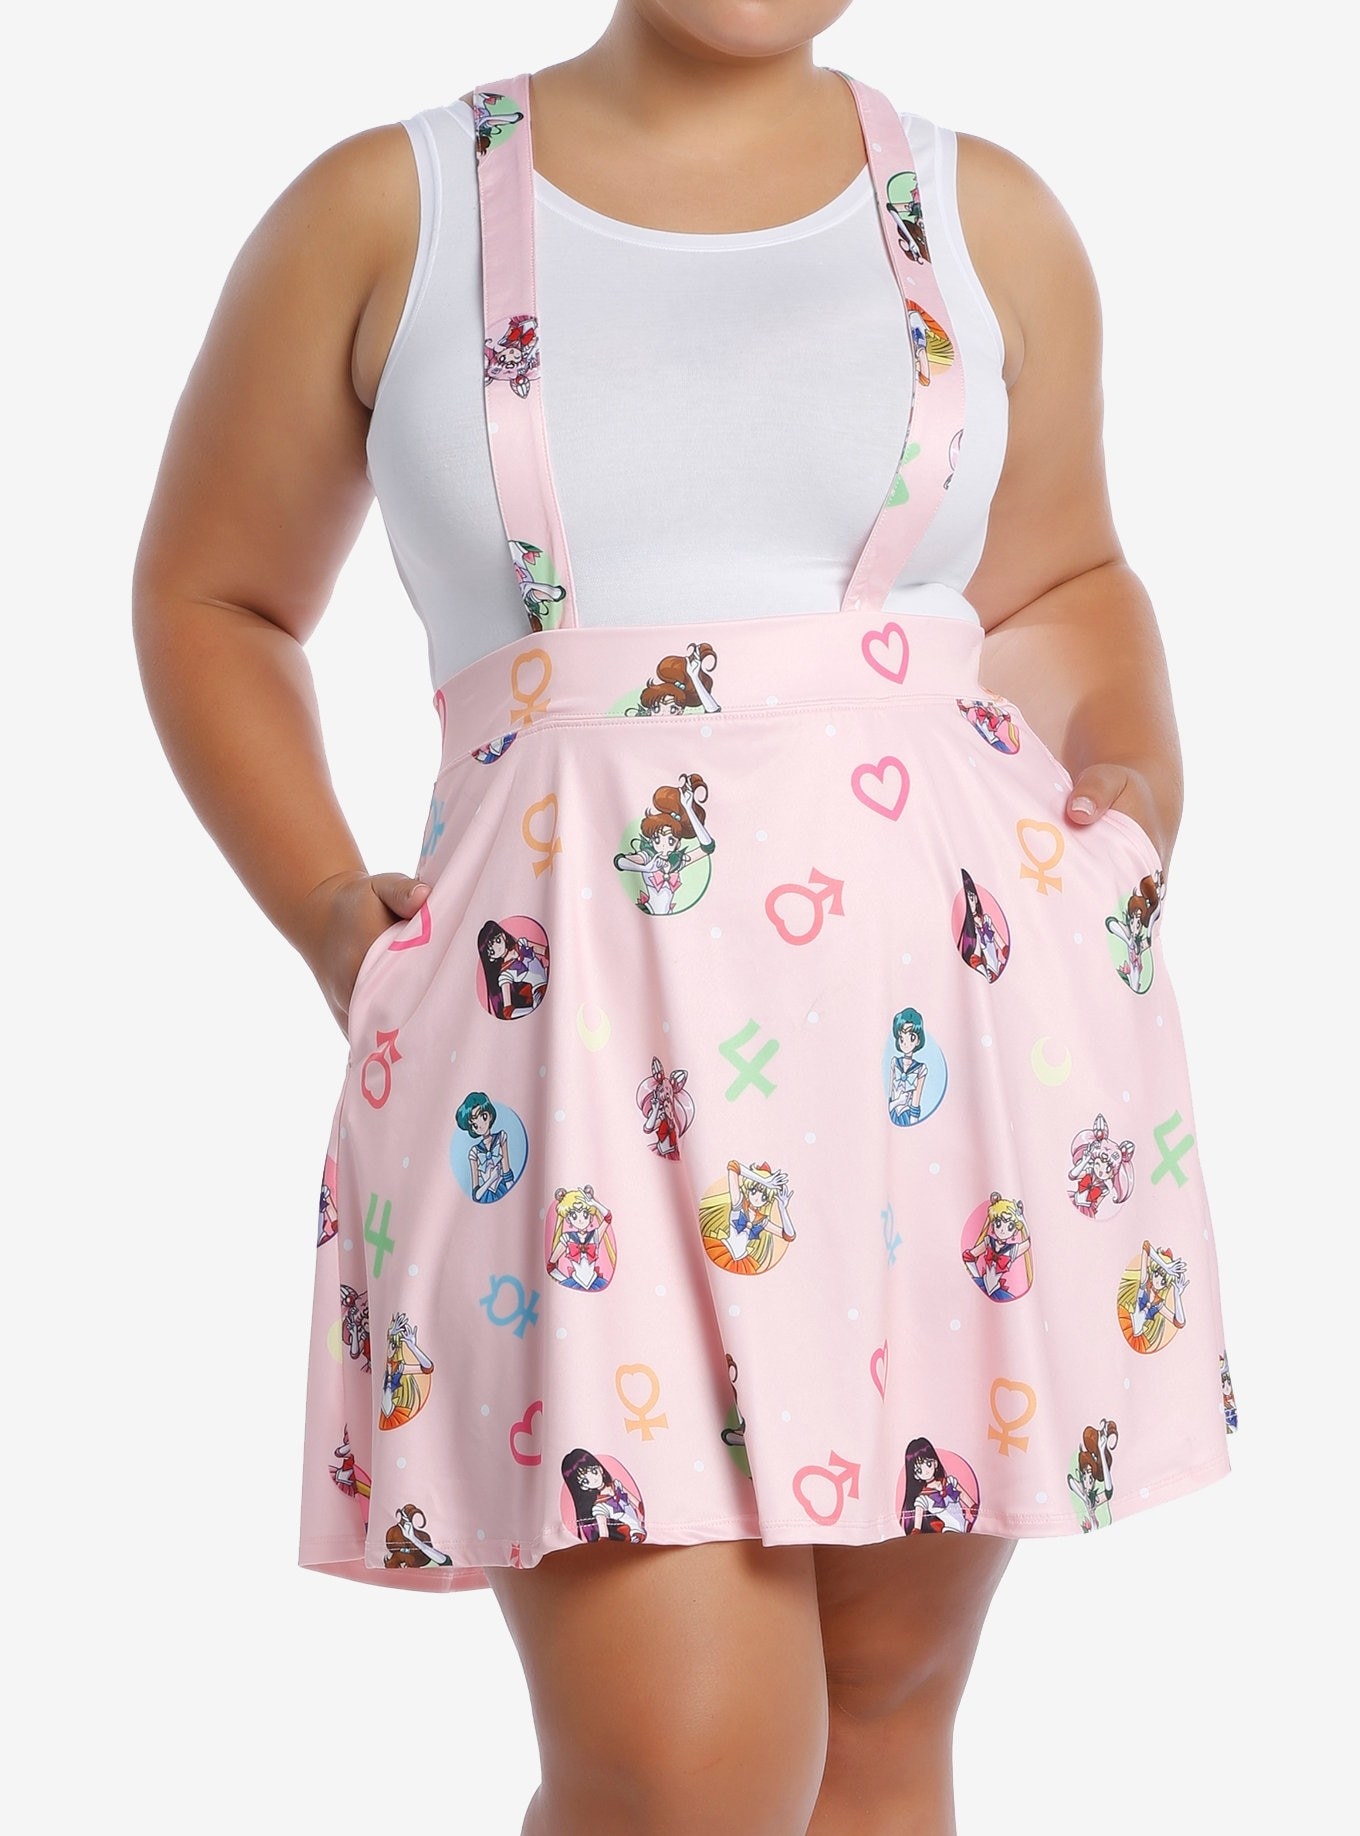 Model wearing a pink suspender skirt with Sailor Moon images